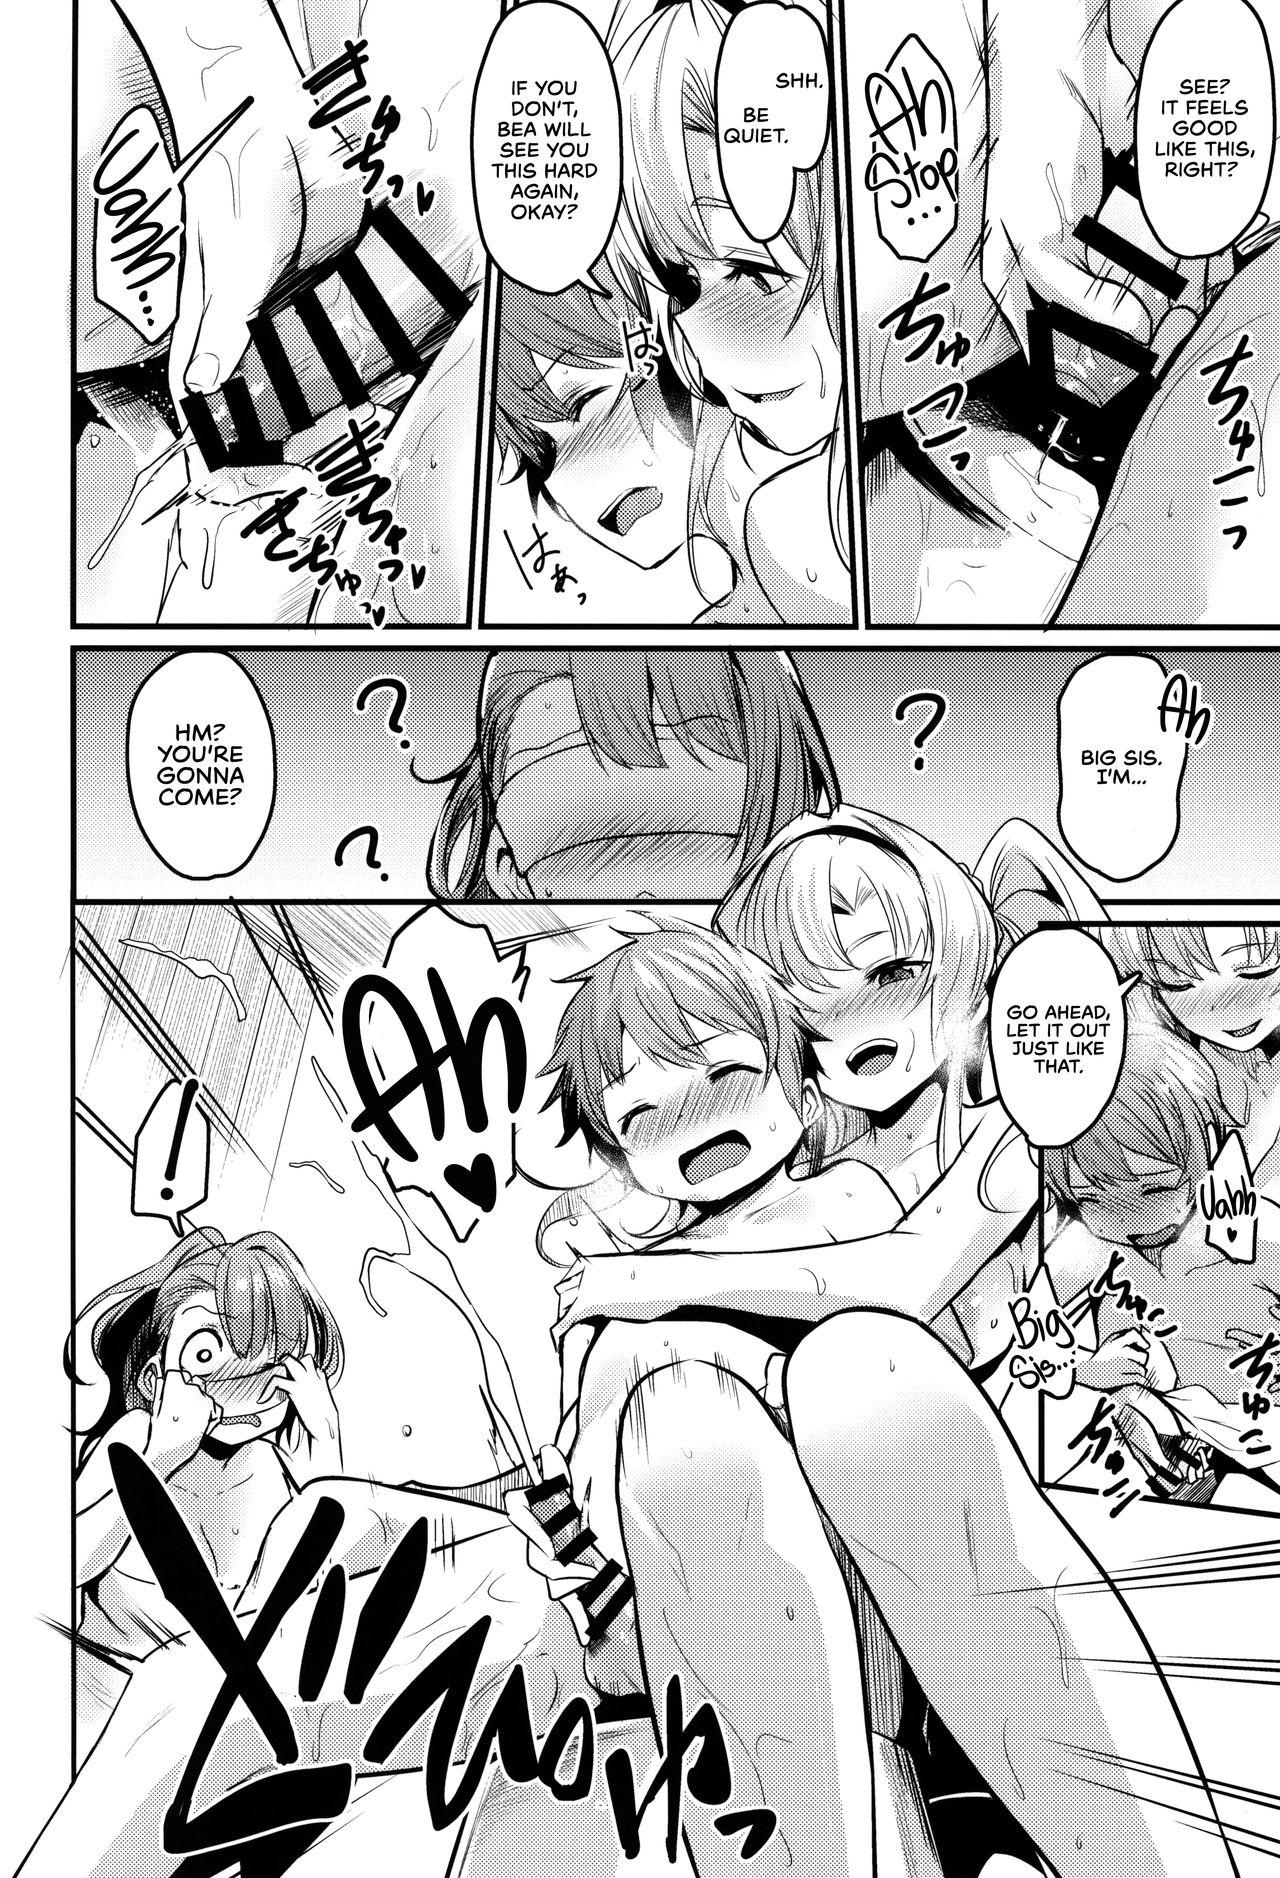 Satin Be to Ze | Be & Ze - Granblue fantasy Gostosas - Page 8